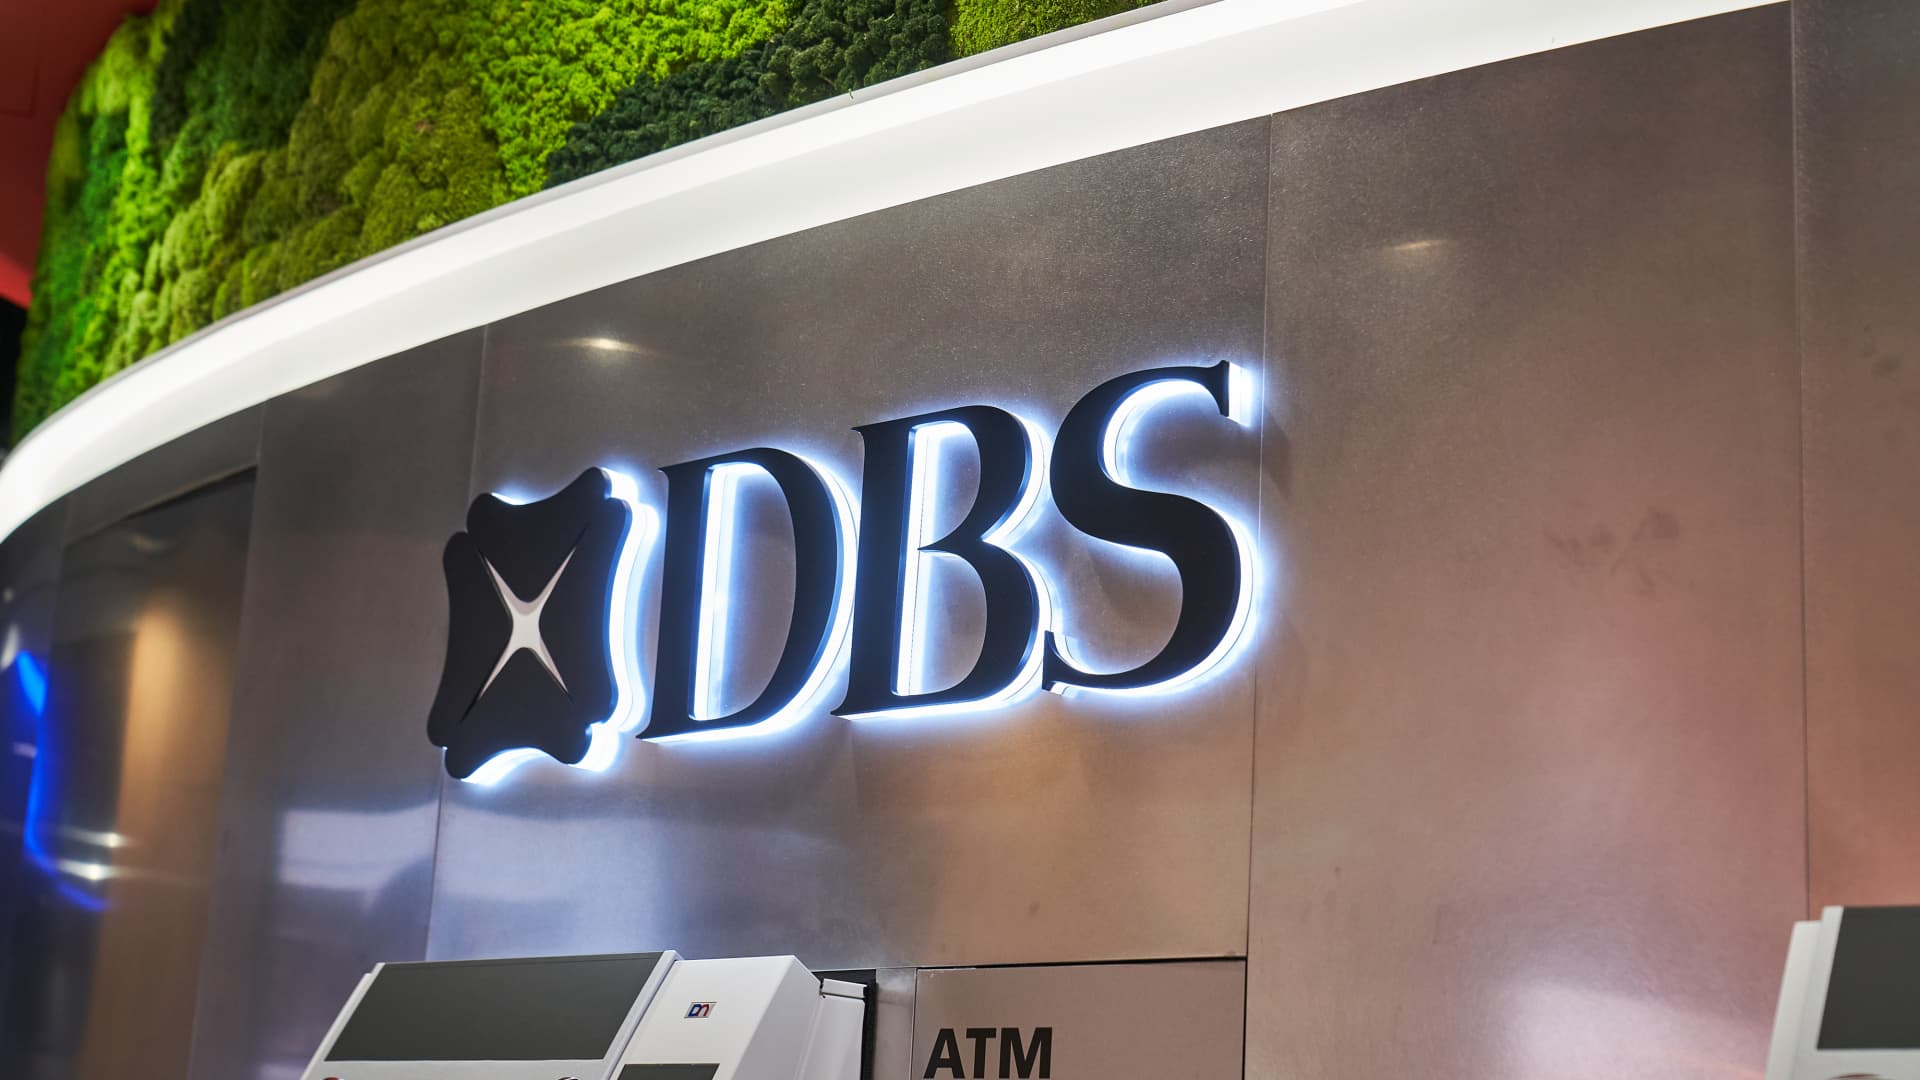 Singapore’s banking authority says DBS outage was ‘unacceptable’